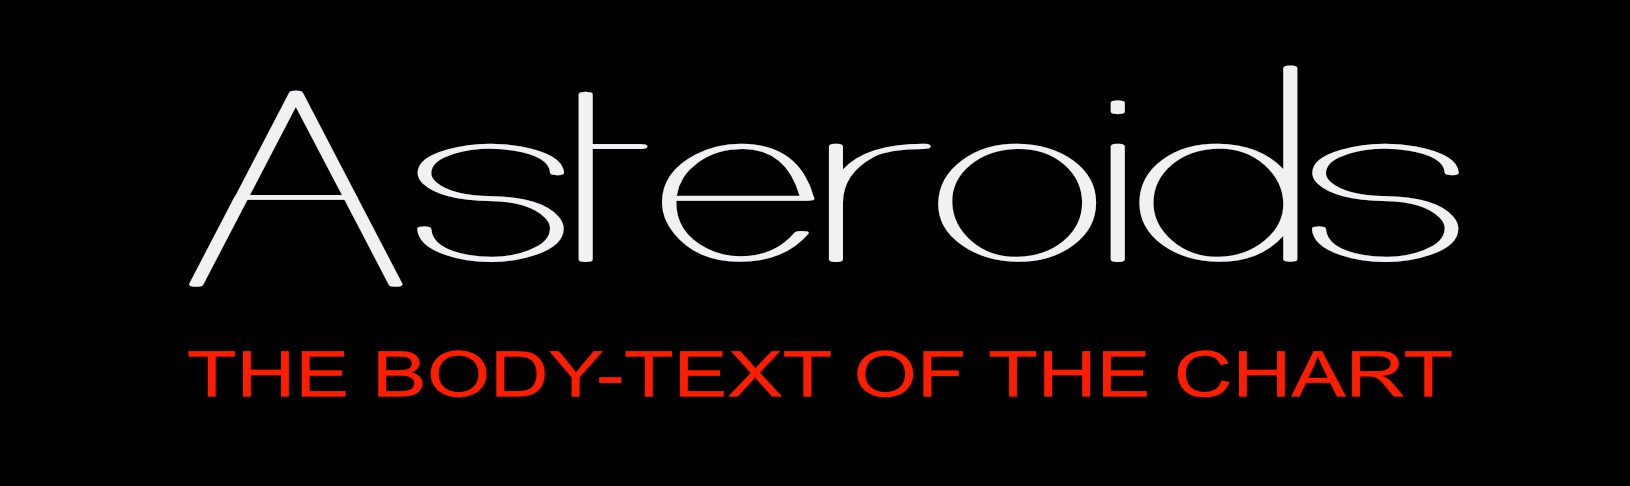 Asteroids: Te Body-Text of the Chart (banner thumbnail)